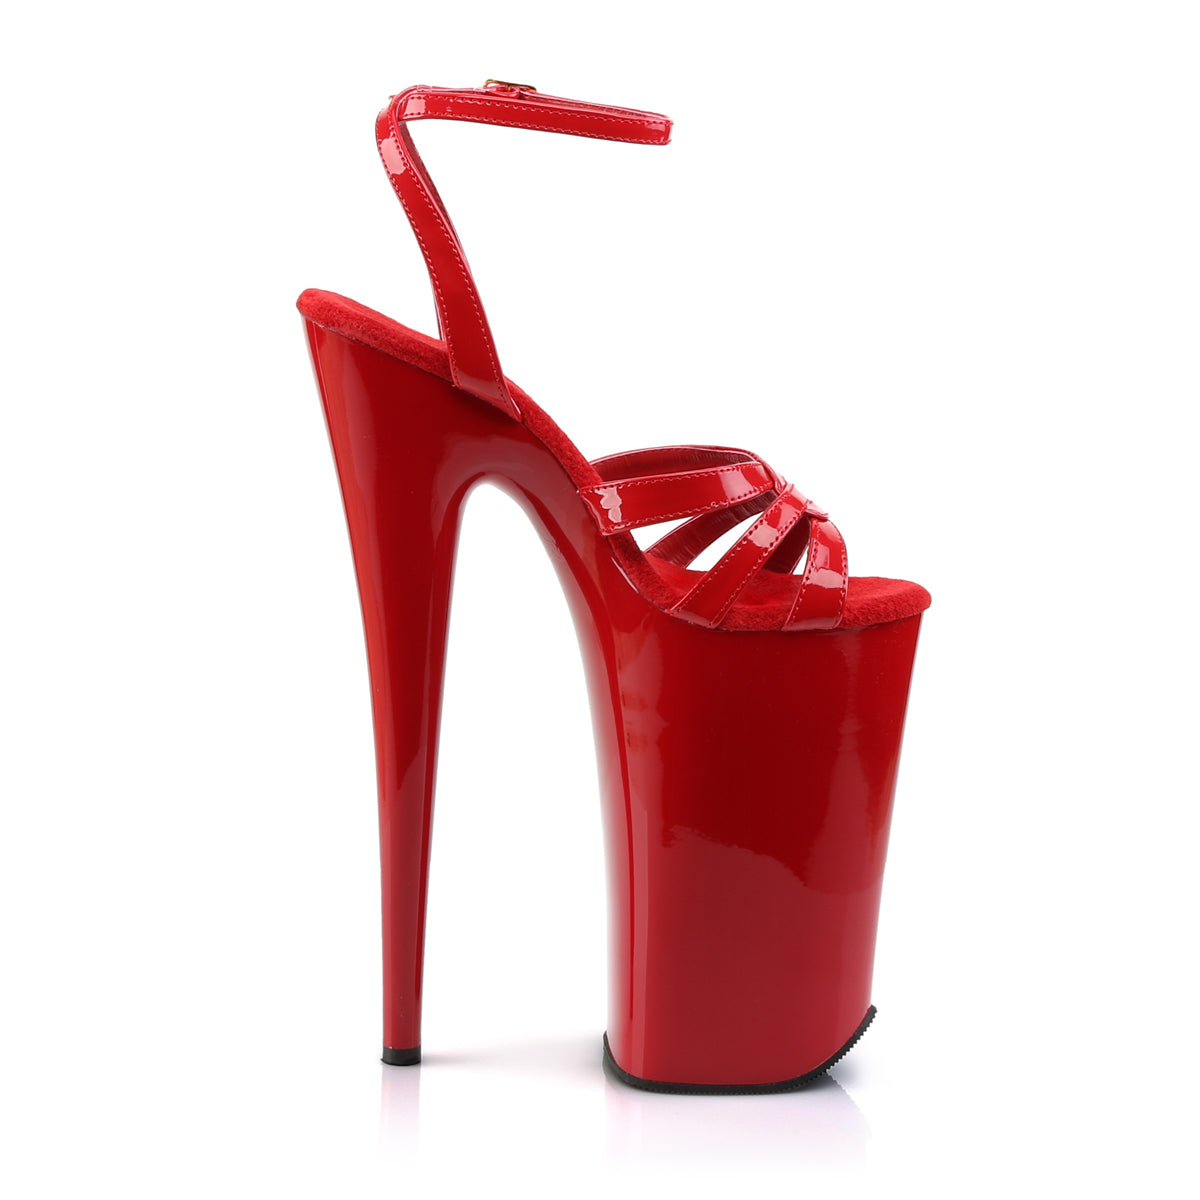 BEYOND-012 Pleaser Red/Red Platform Shoes [Extreme High Heels]